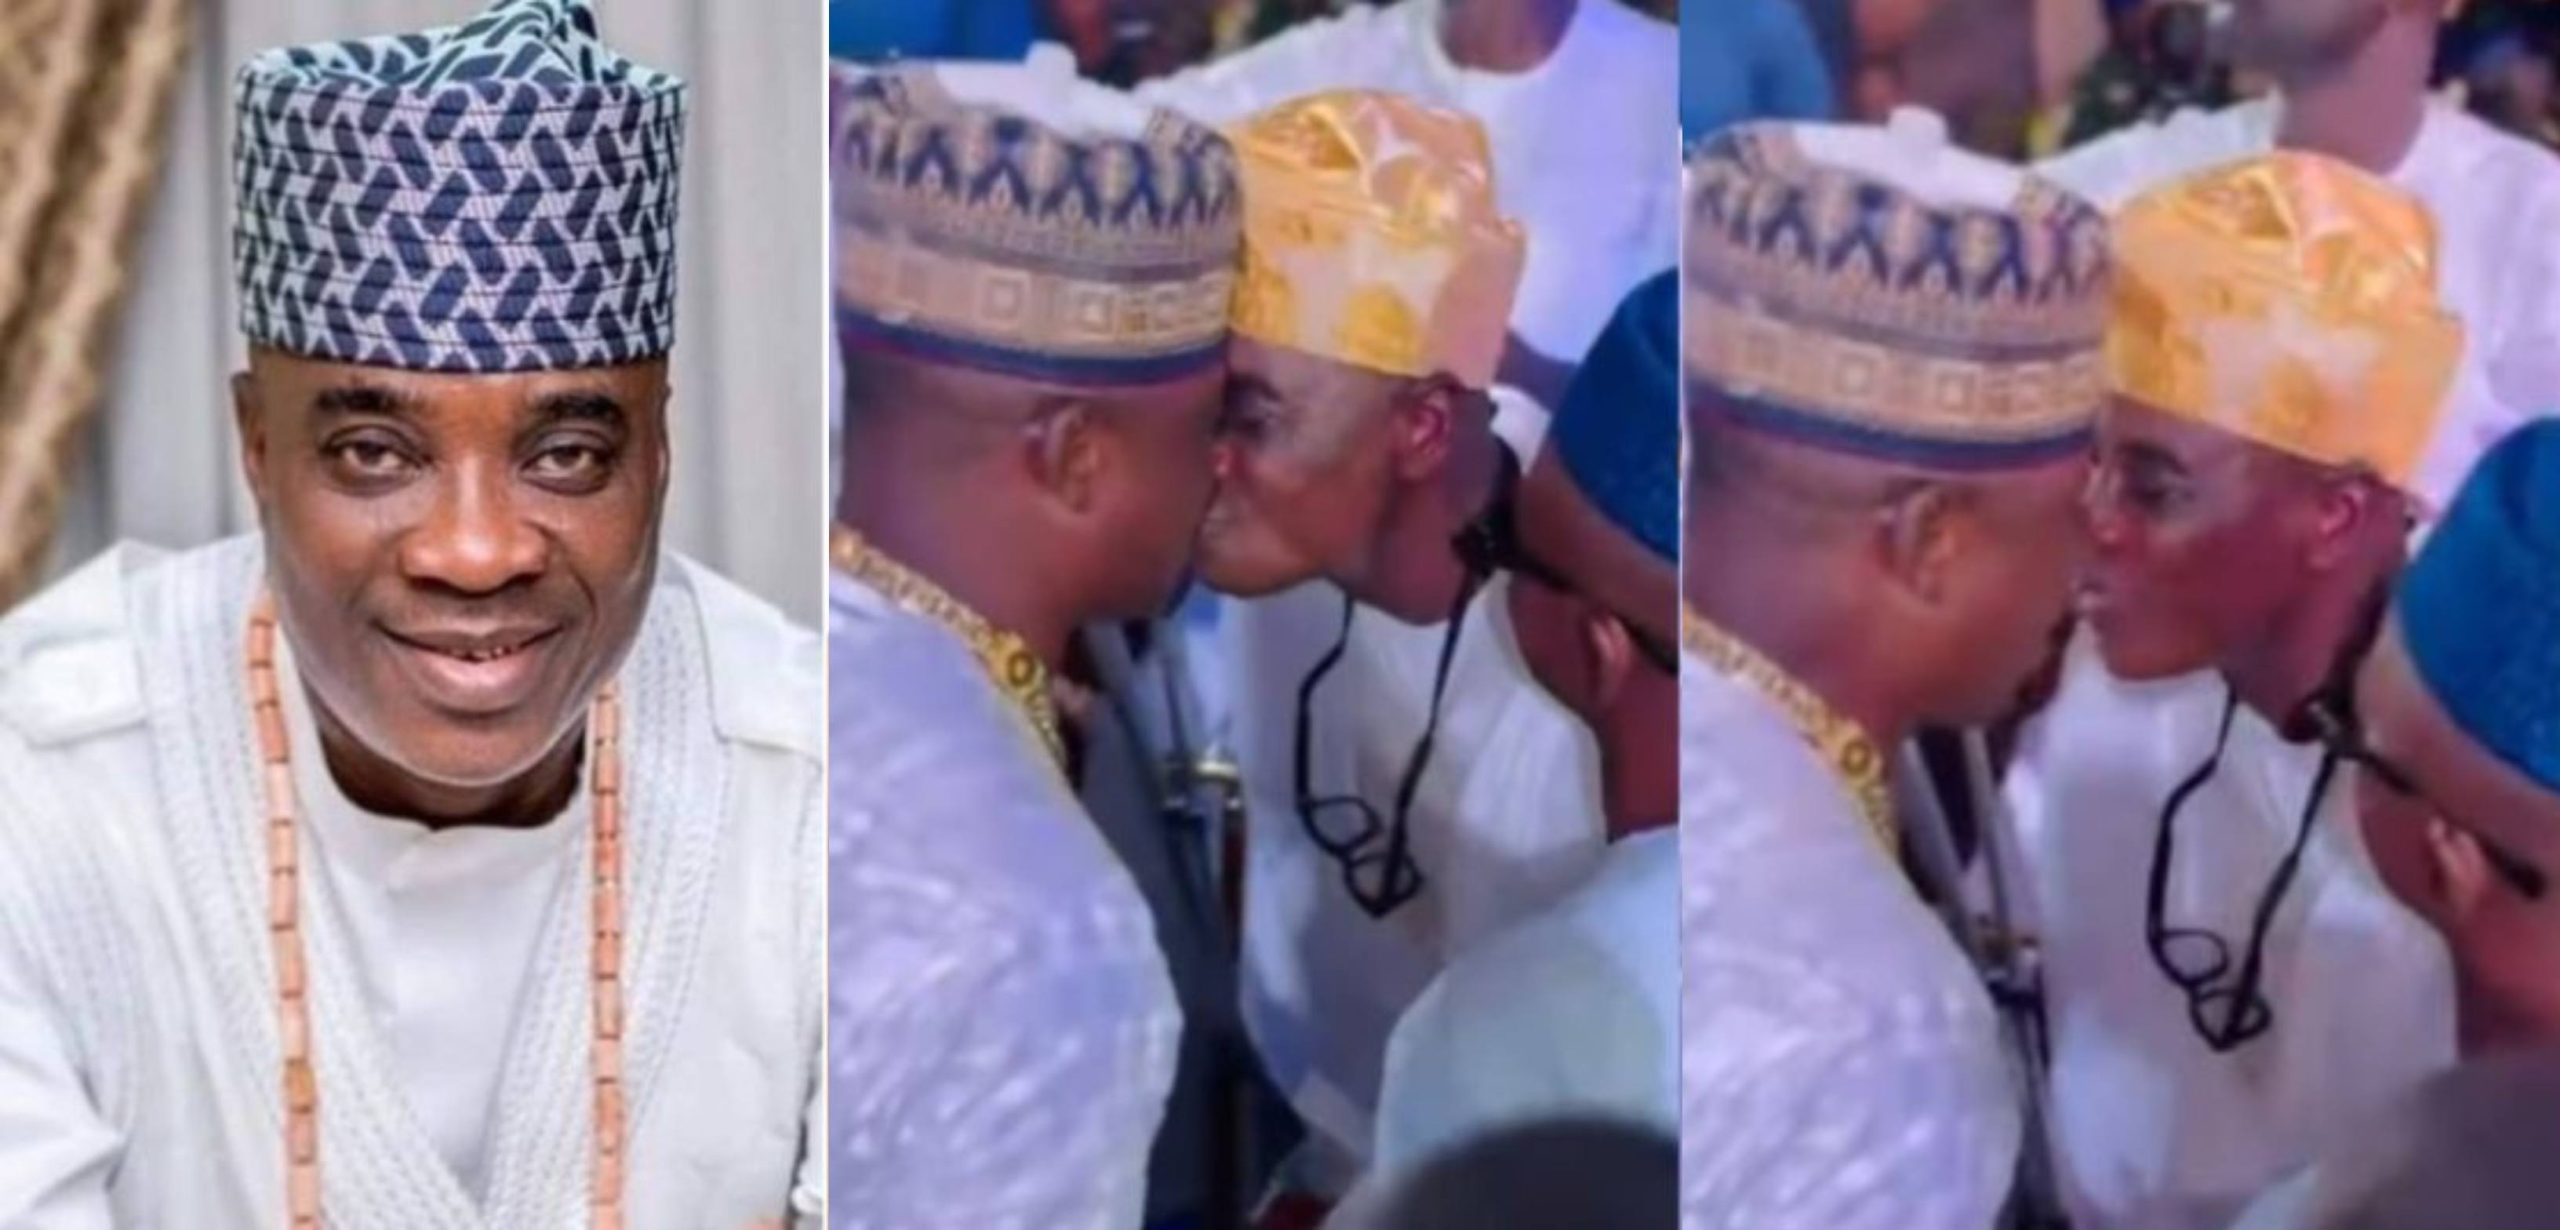 Video of Singer K1 De Ultimate lock lips with fellow man on stage at an event sparks reactions online